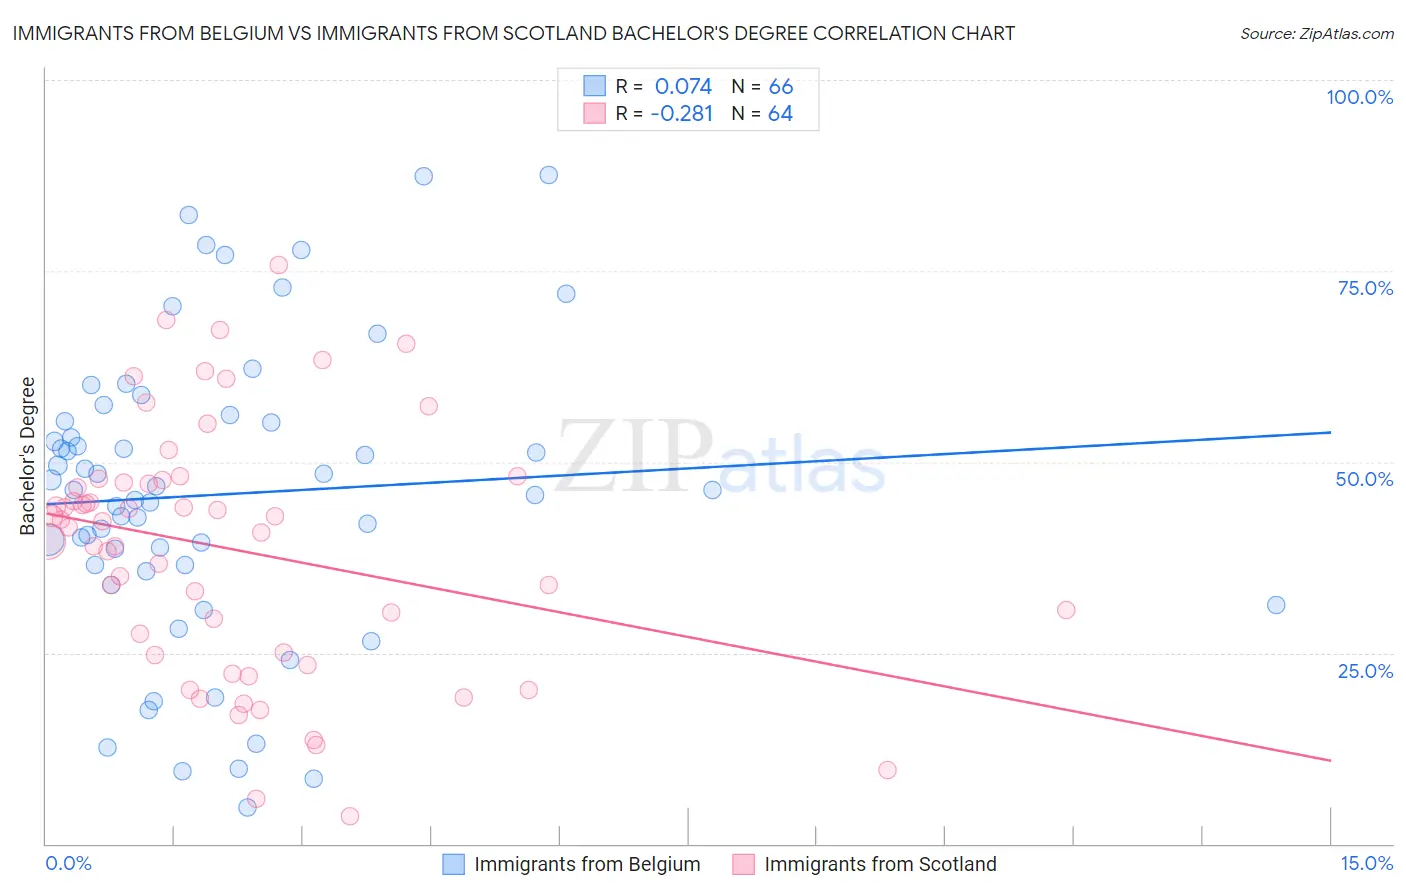 Immigrants from Belgium vs Immigrants from Scotland Bachelor's Degree